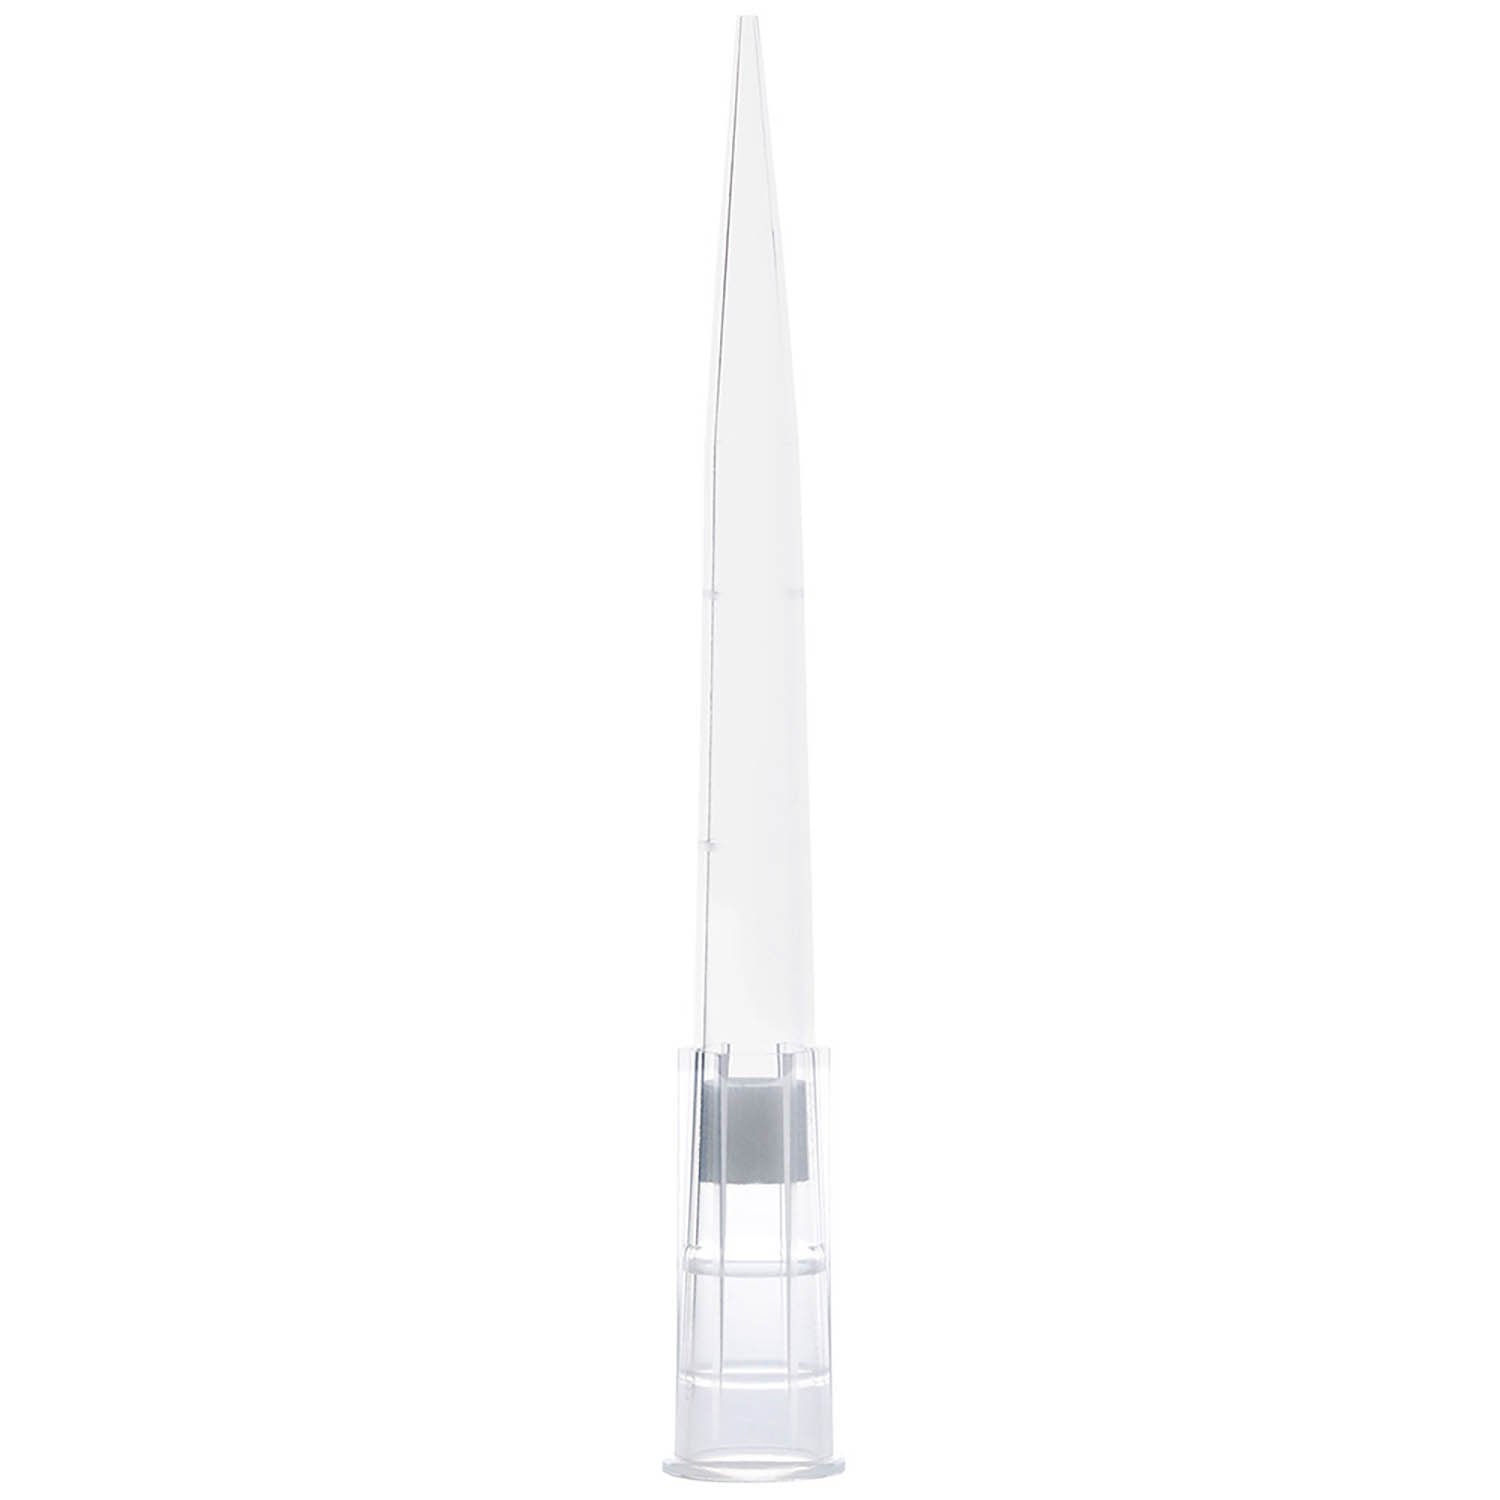 1uL-200uL Certified Universal Low Retention Graduated Filter Pipette Tip - Natural, Sterile, 54mm, Case of 1920